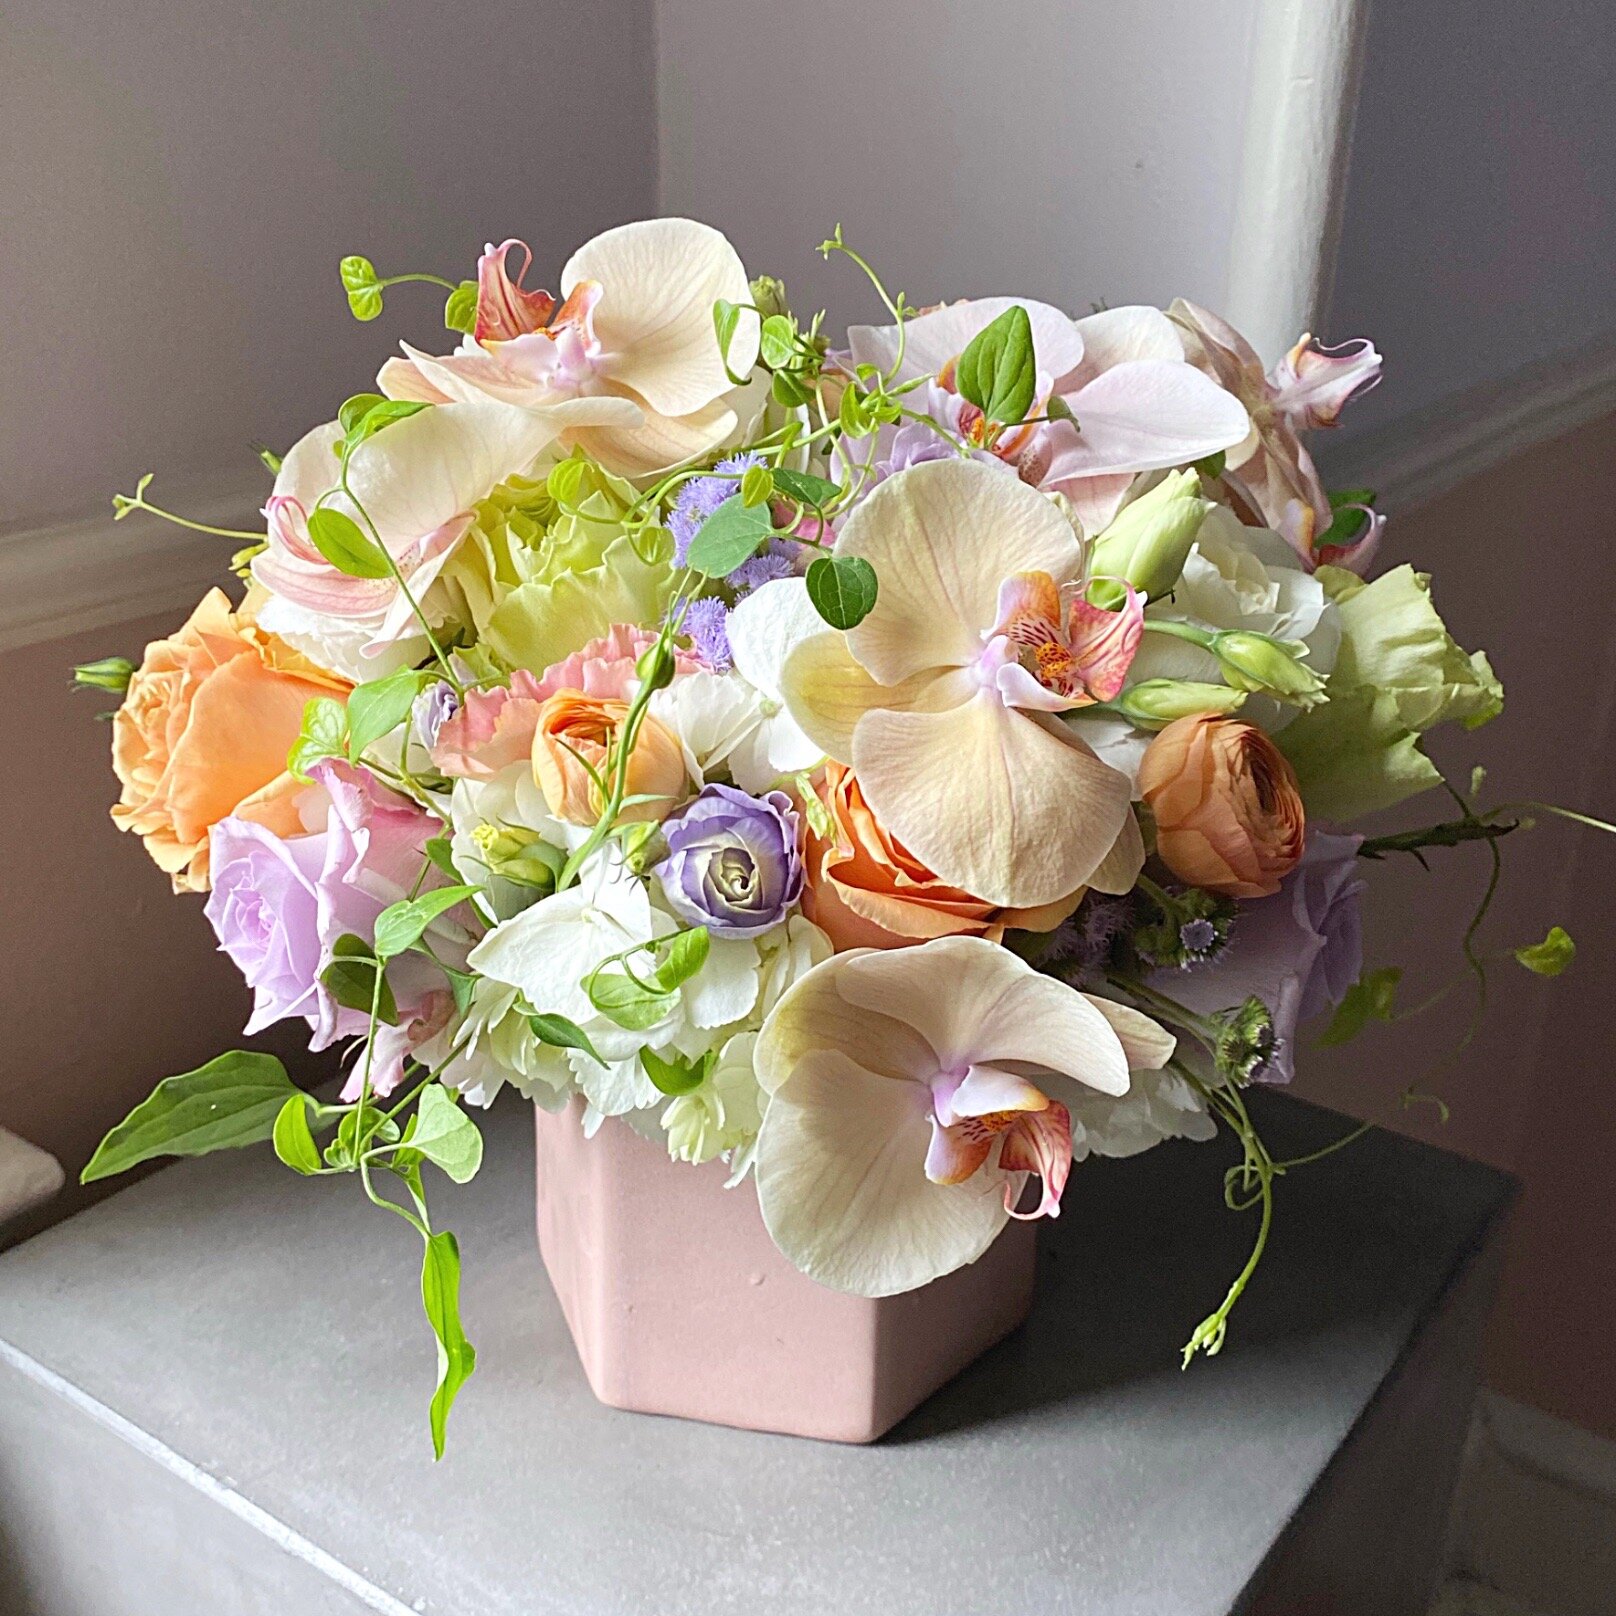 Summer Flower bouquet in Peach and lavender